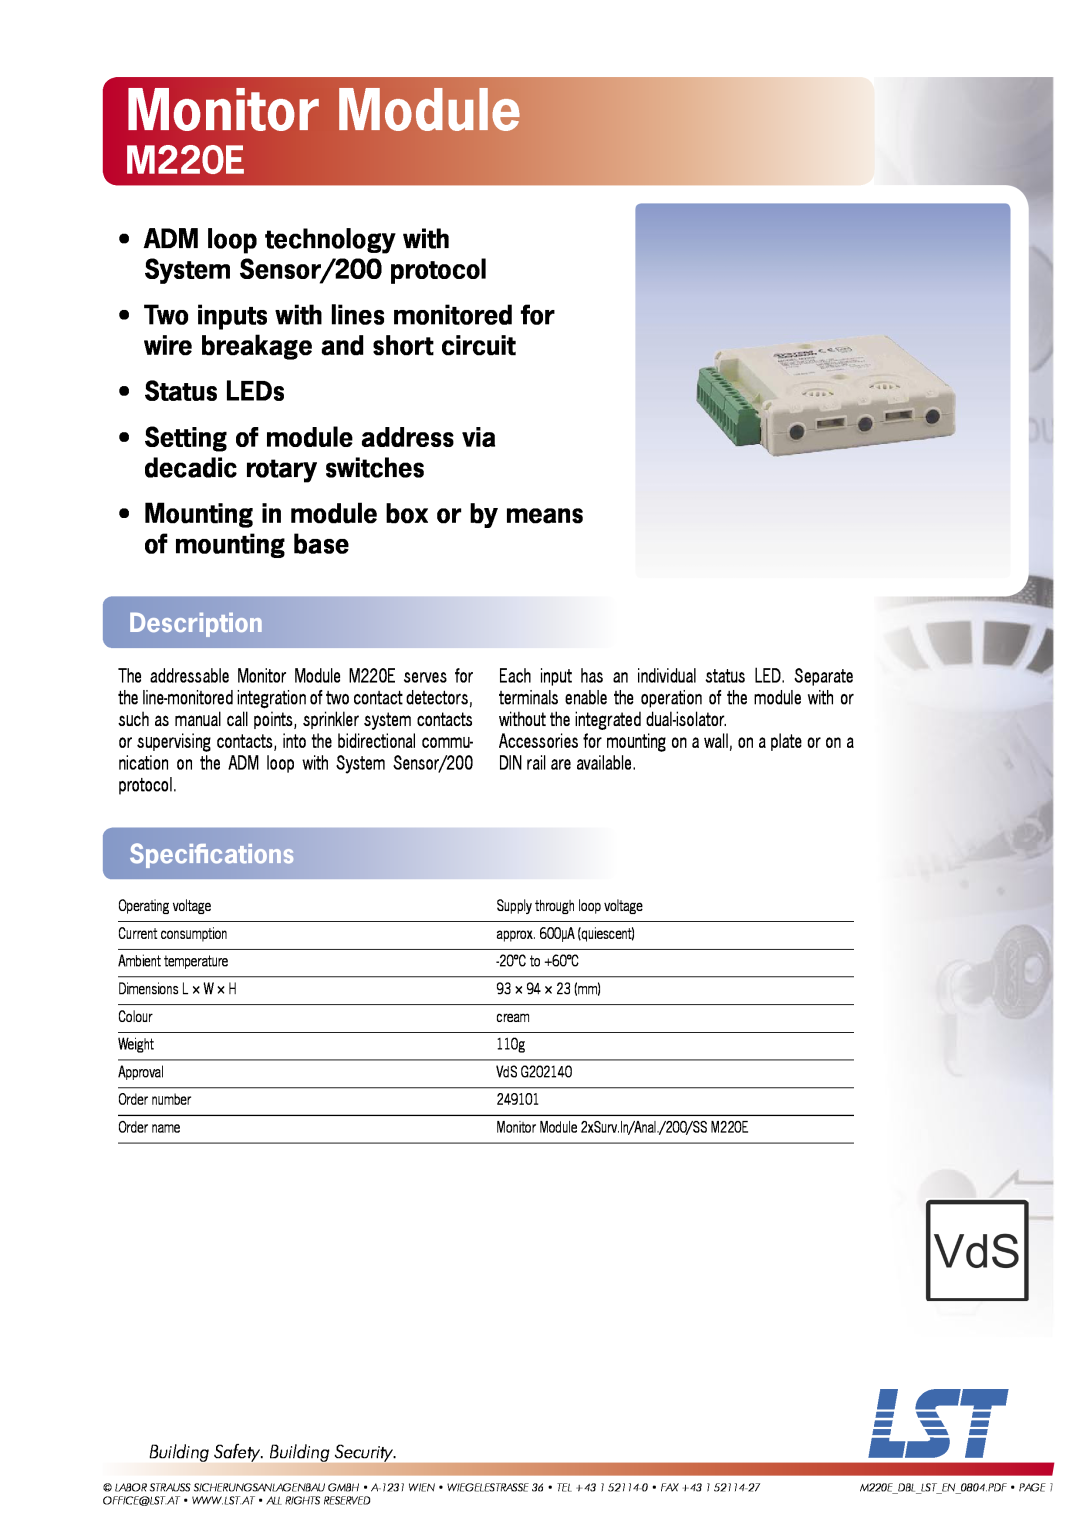 LST M220E specifications Monitor Module, Description, Speciﬁcations 